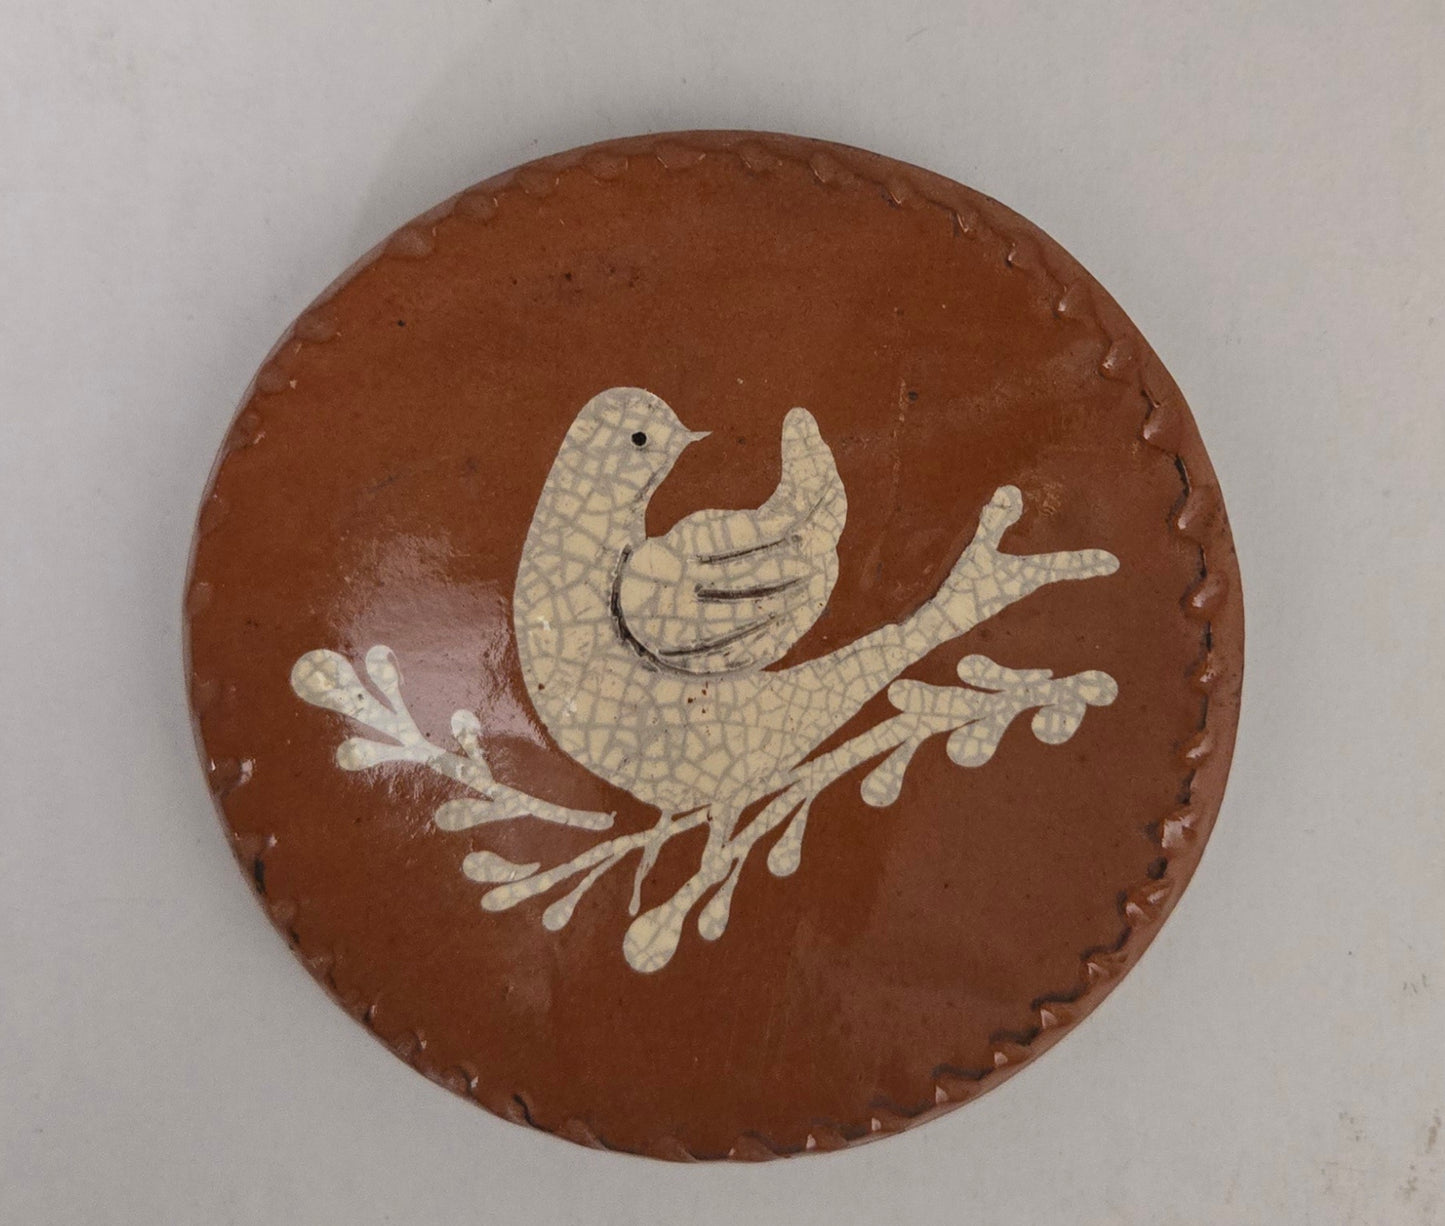 Collection of 4" Round Plates - Turtle Creek Pottery from the Workshops of David T. Smith